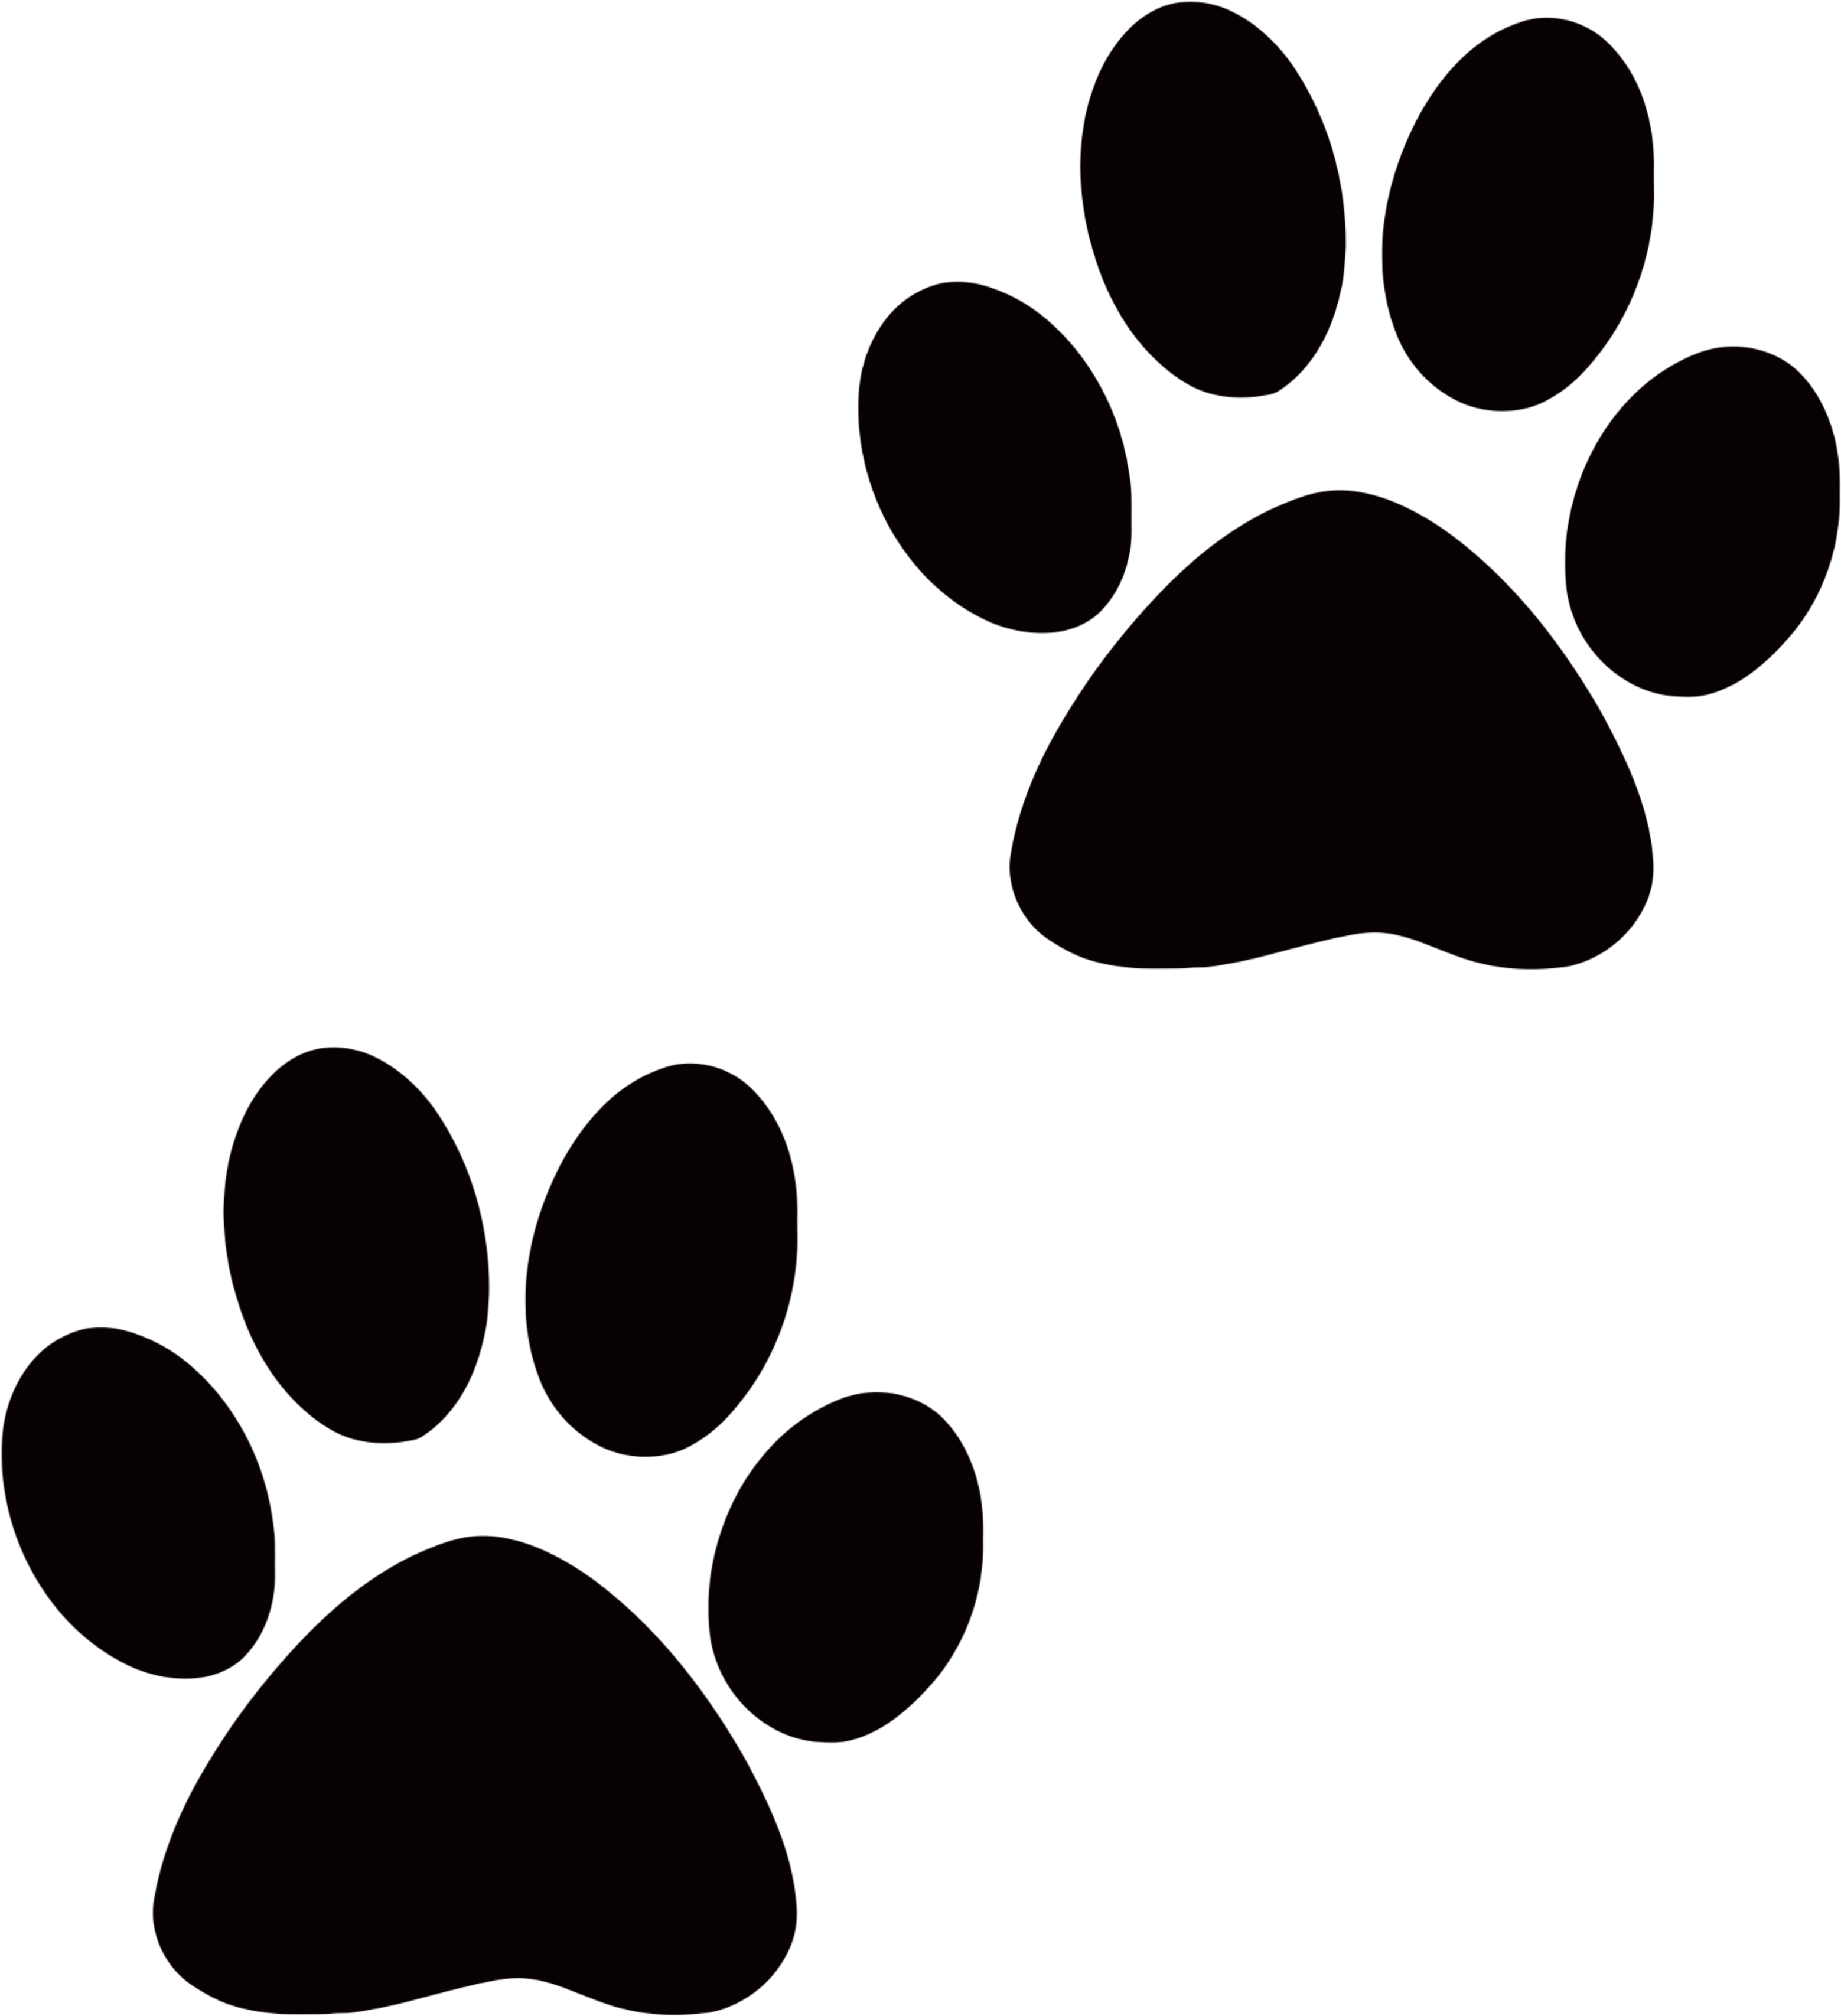 Tiger Paws Clipart Dog Paw Transparent Background 3333x3541 Png Clipart Download